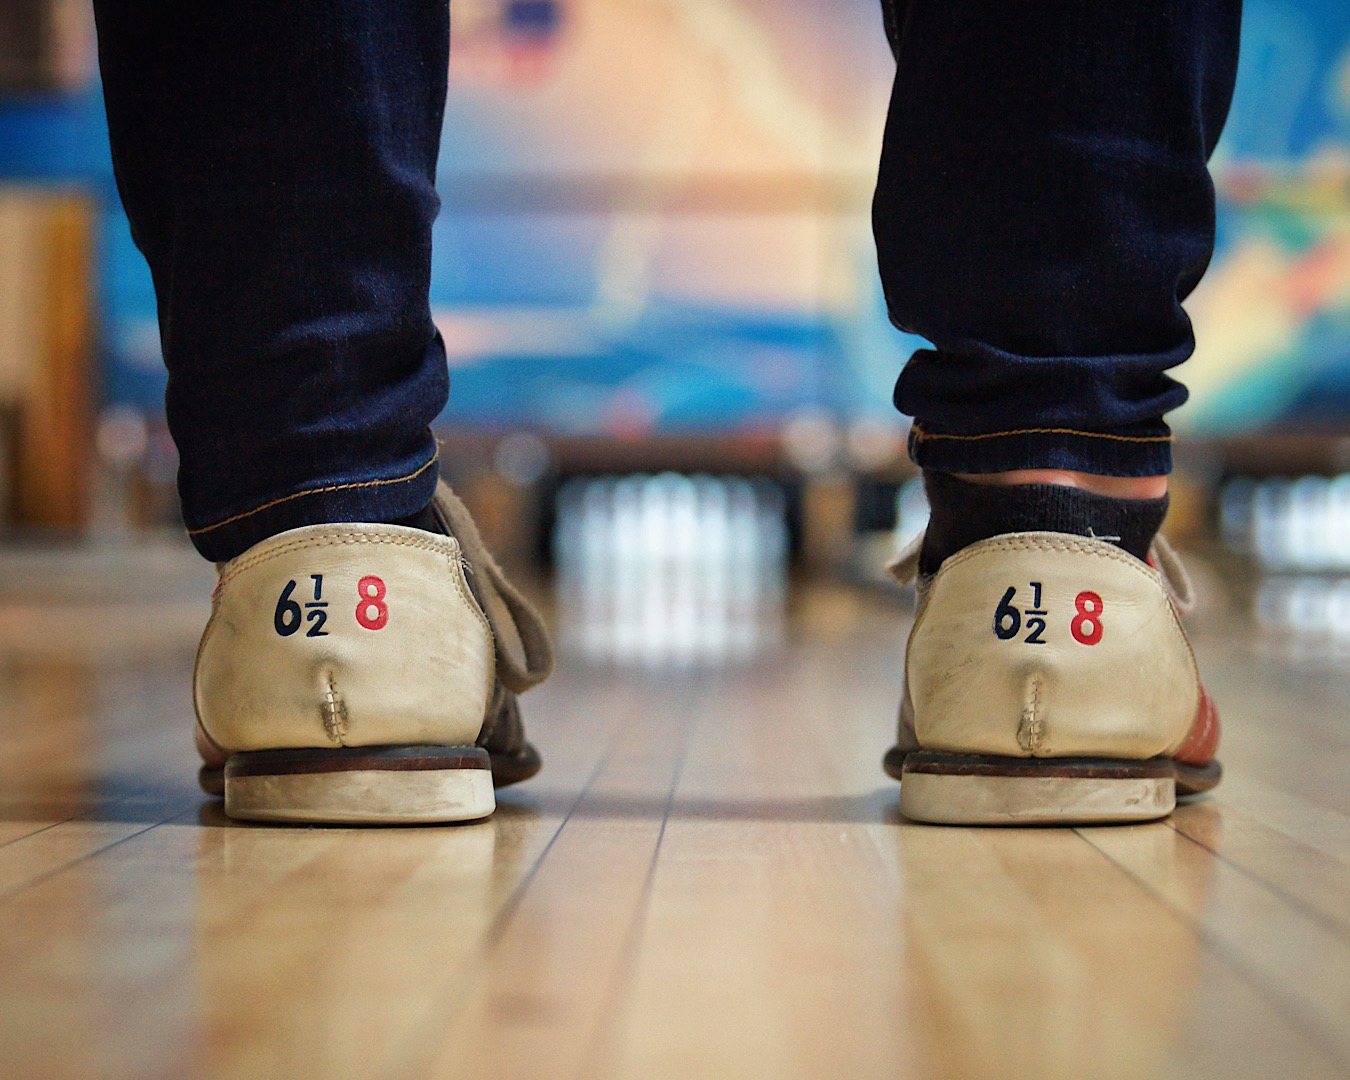 Somebody’s jean-clad legs from behind sporting the ever-fabulous typical bowling shoes in size 6.5. 